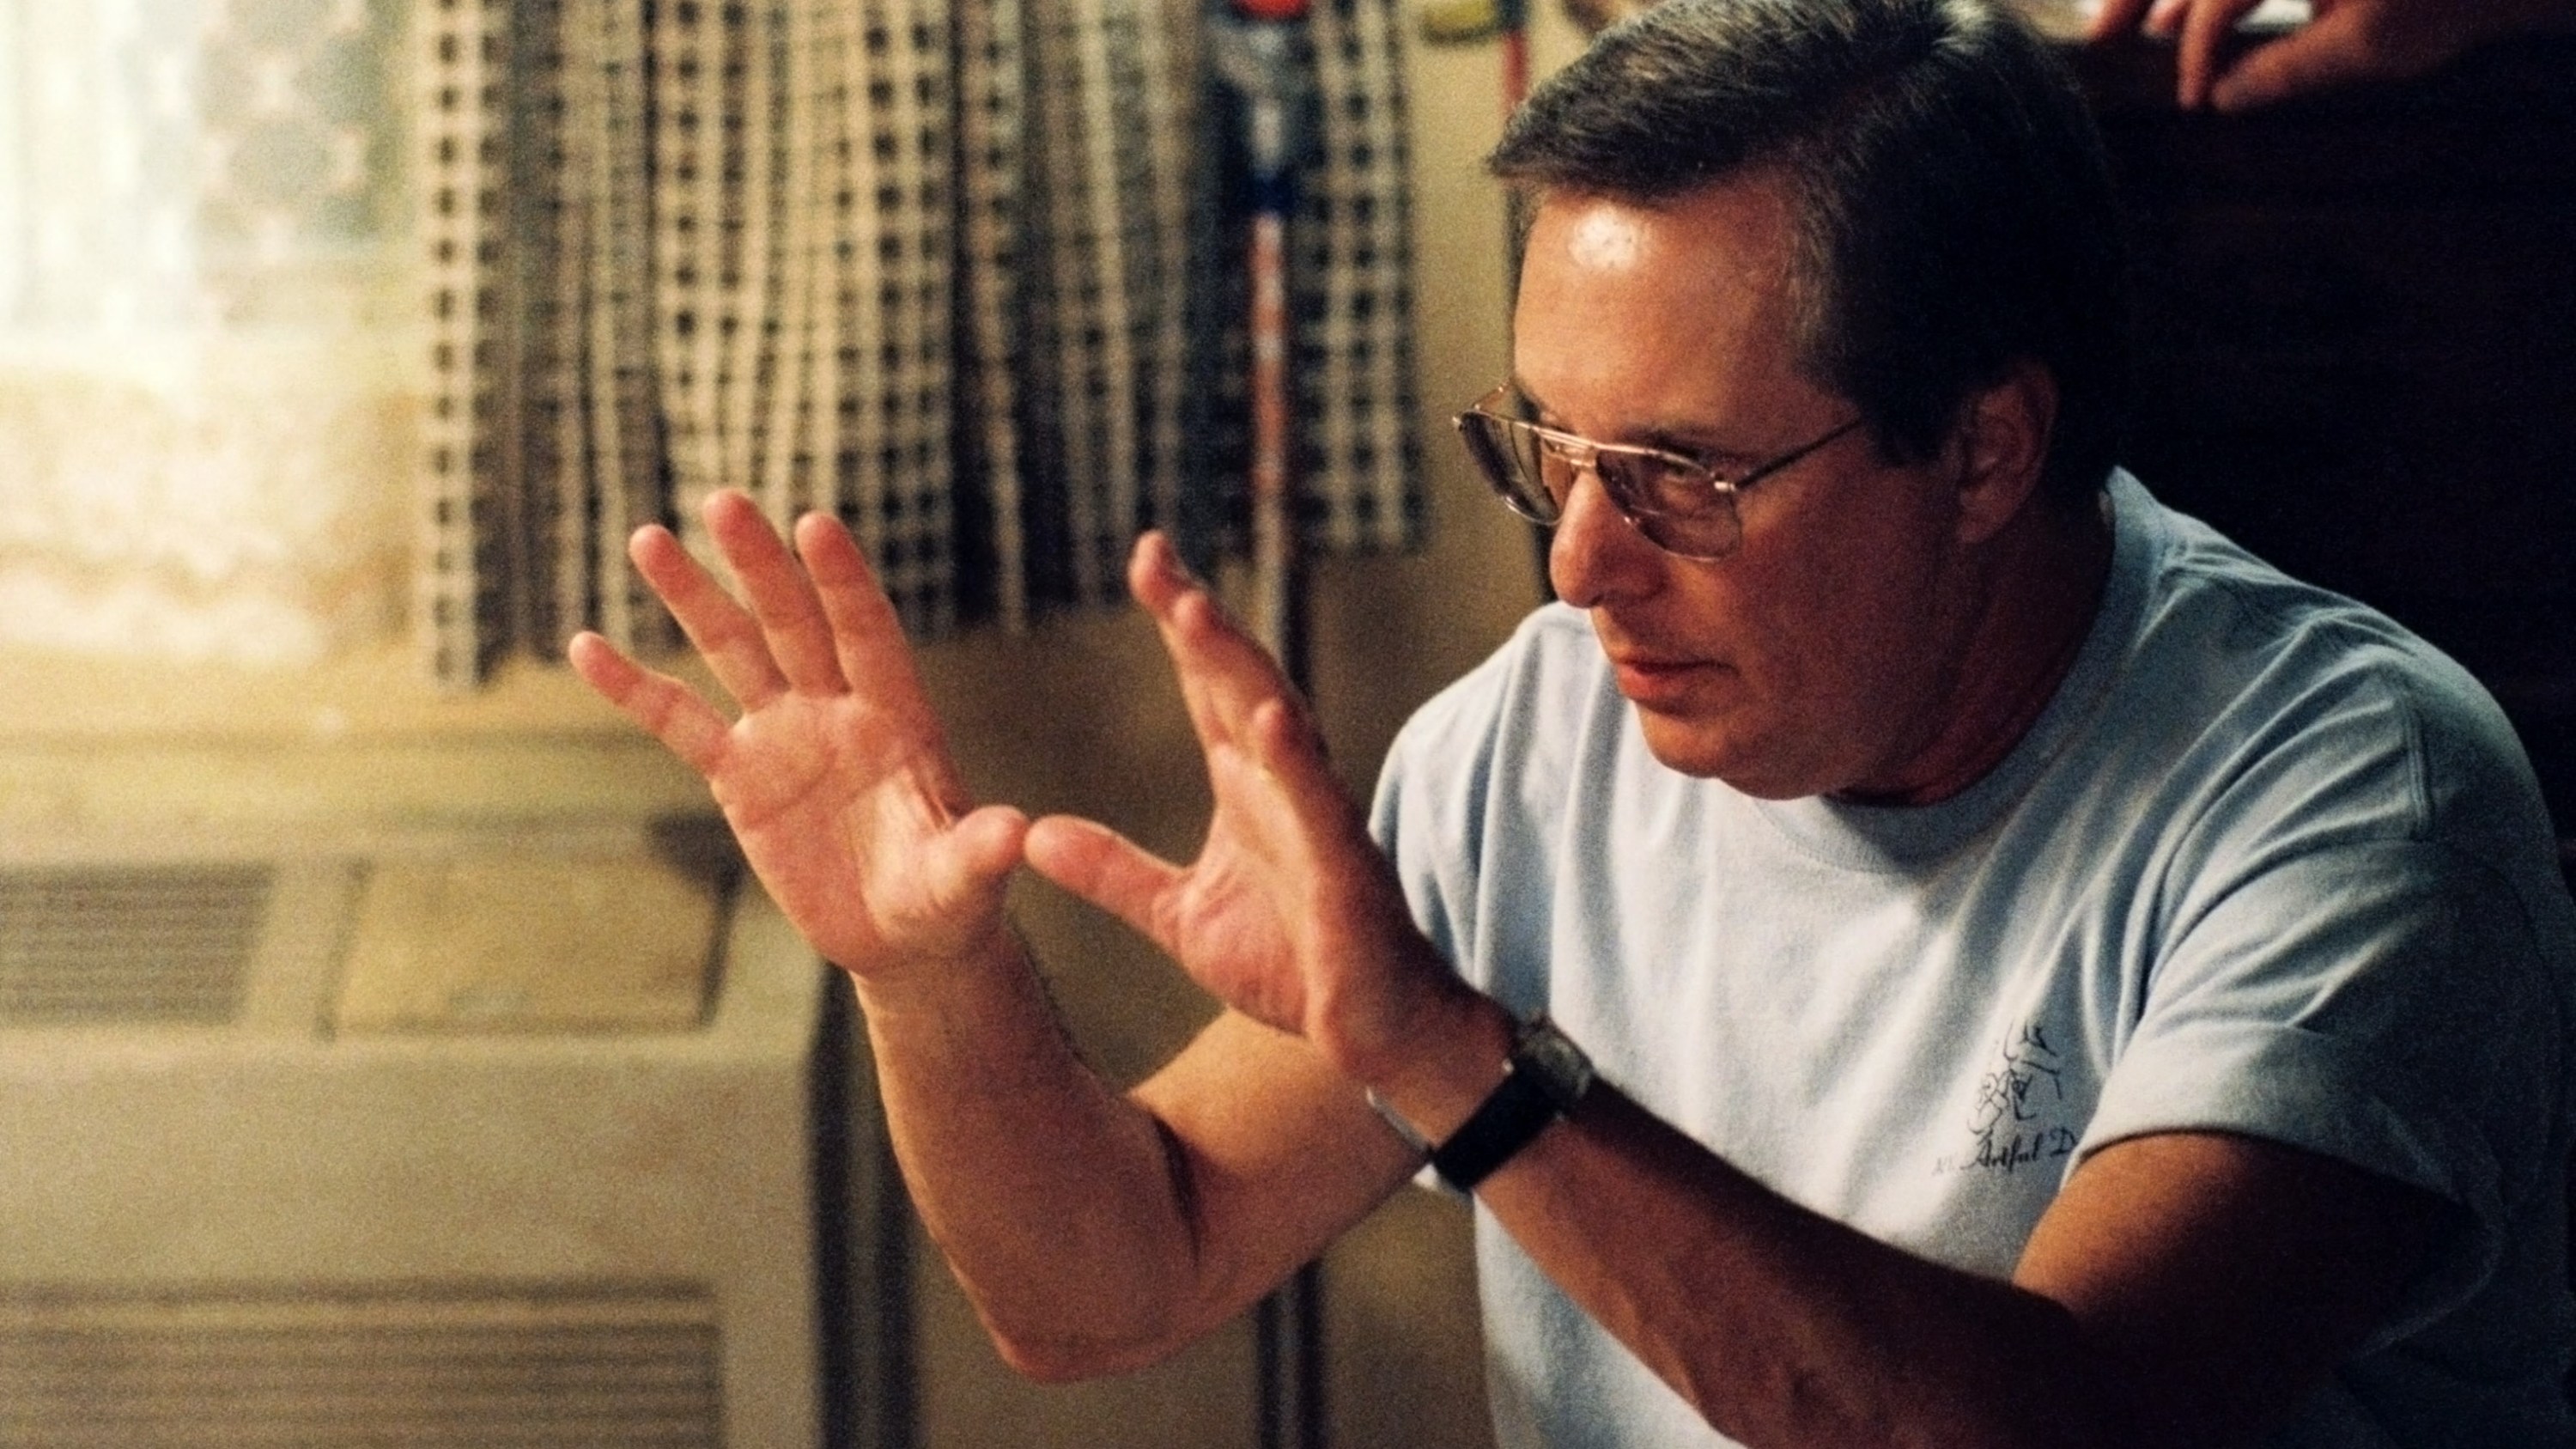 BUG, Director William Friedkin, on set, 2006. ©Lions Gate/courtesy Everett Collection